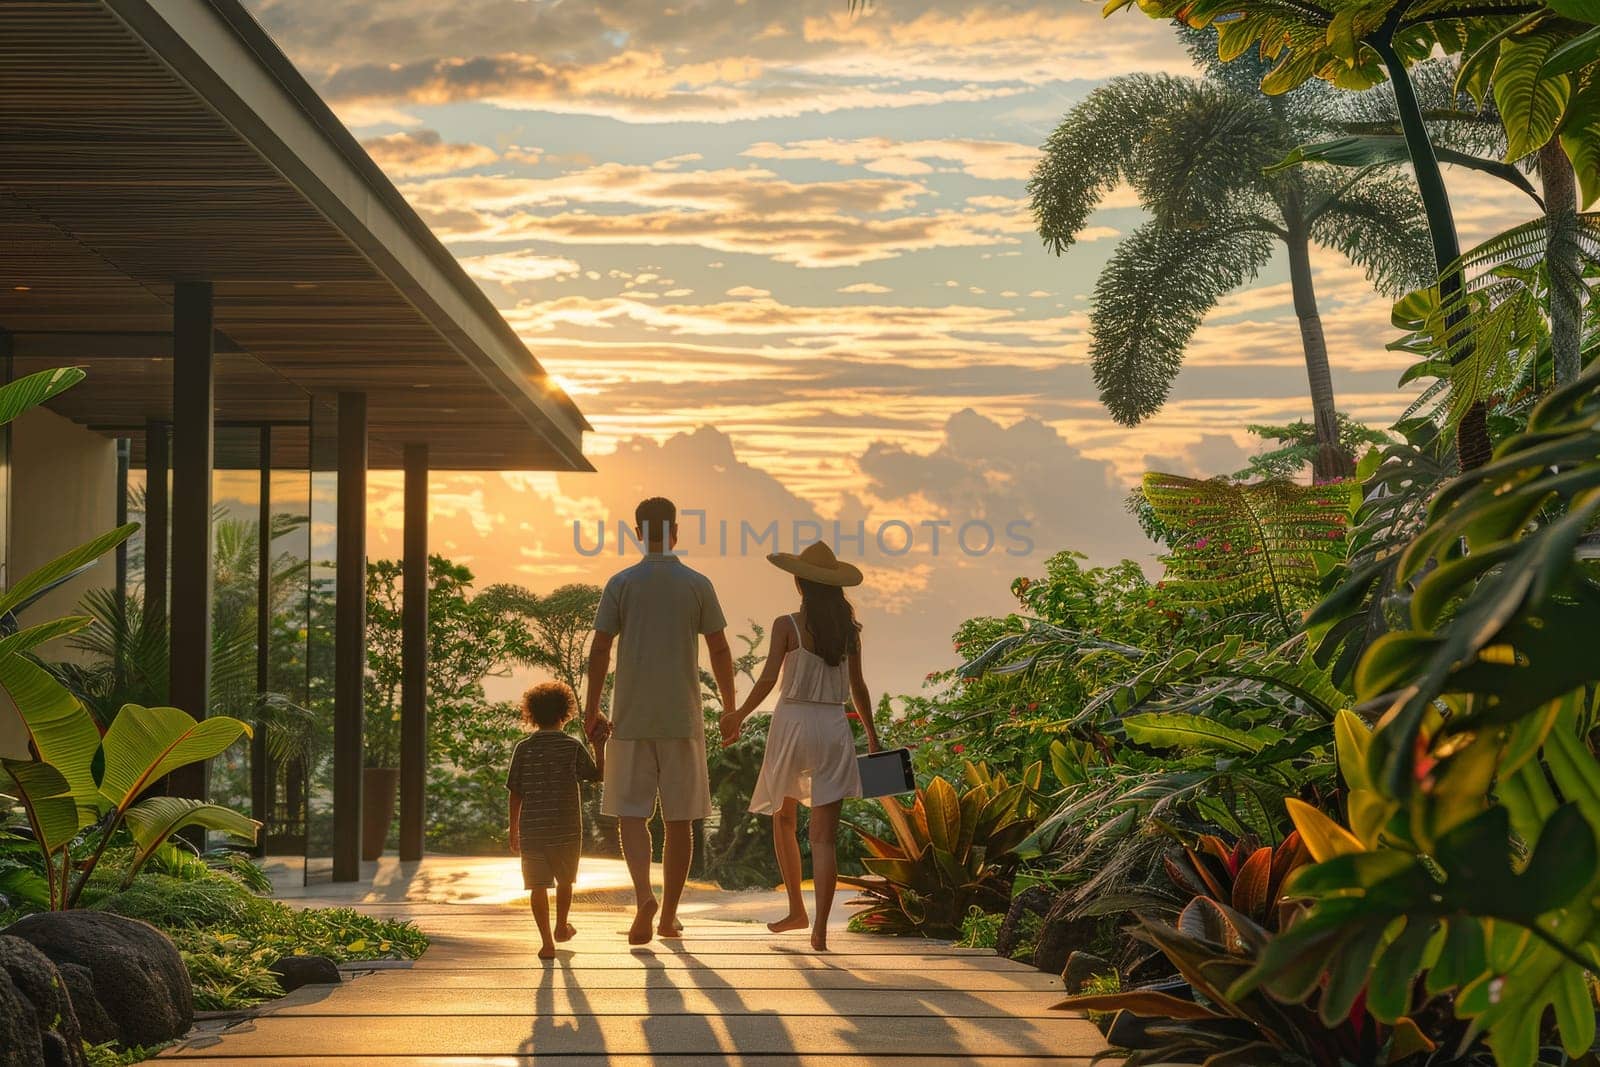 A family walks down a path in a tropical garden. The sun is setting, casting a warm glow over the scene. The family is enjoying a leisurely stroll, taking in the beauty of the garden